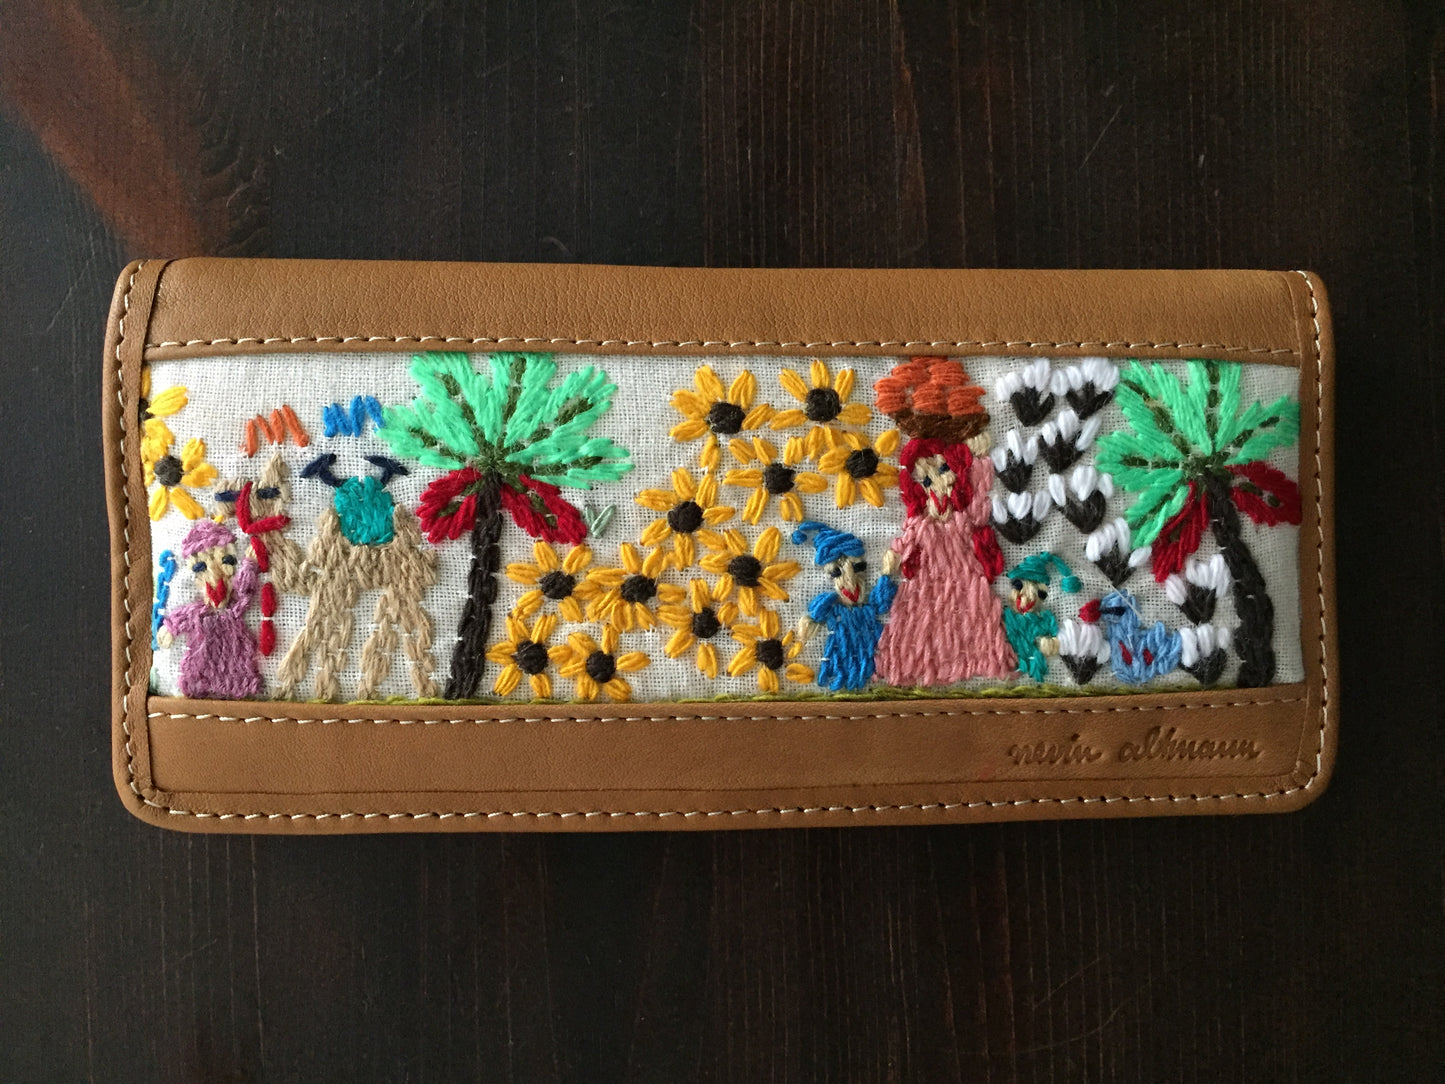 Handmade Leather Wallet with Hand Embroidery - Medium - Dandarah